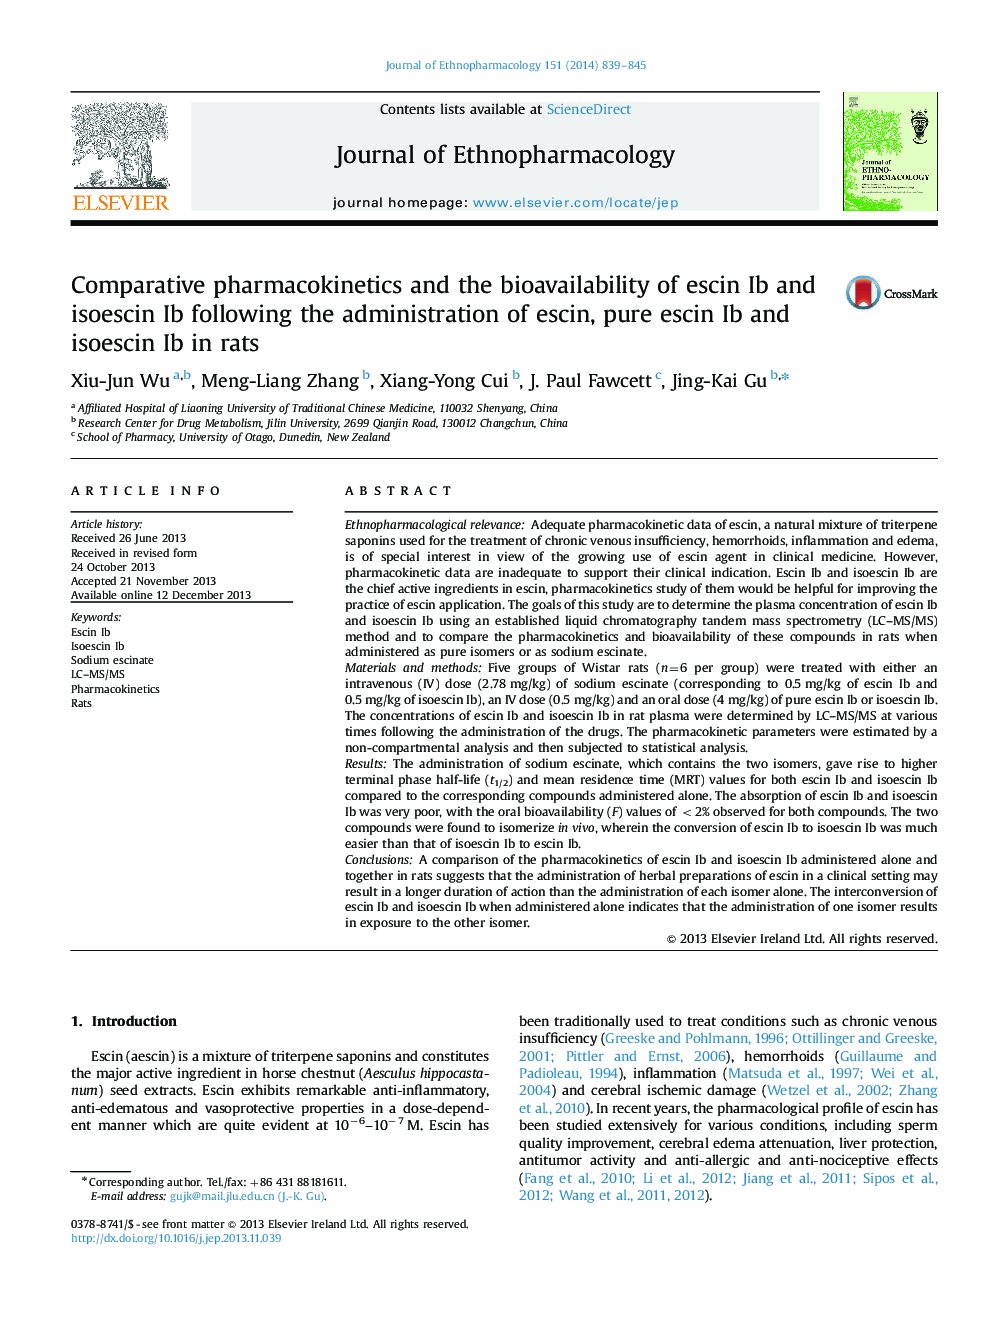 Comparative pharmacokinetics and the bioavailability of escin Ib and isoescin Ib following the administration of escin, pure escin Ib and isoescin Ib in rats